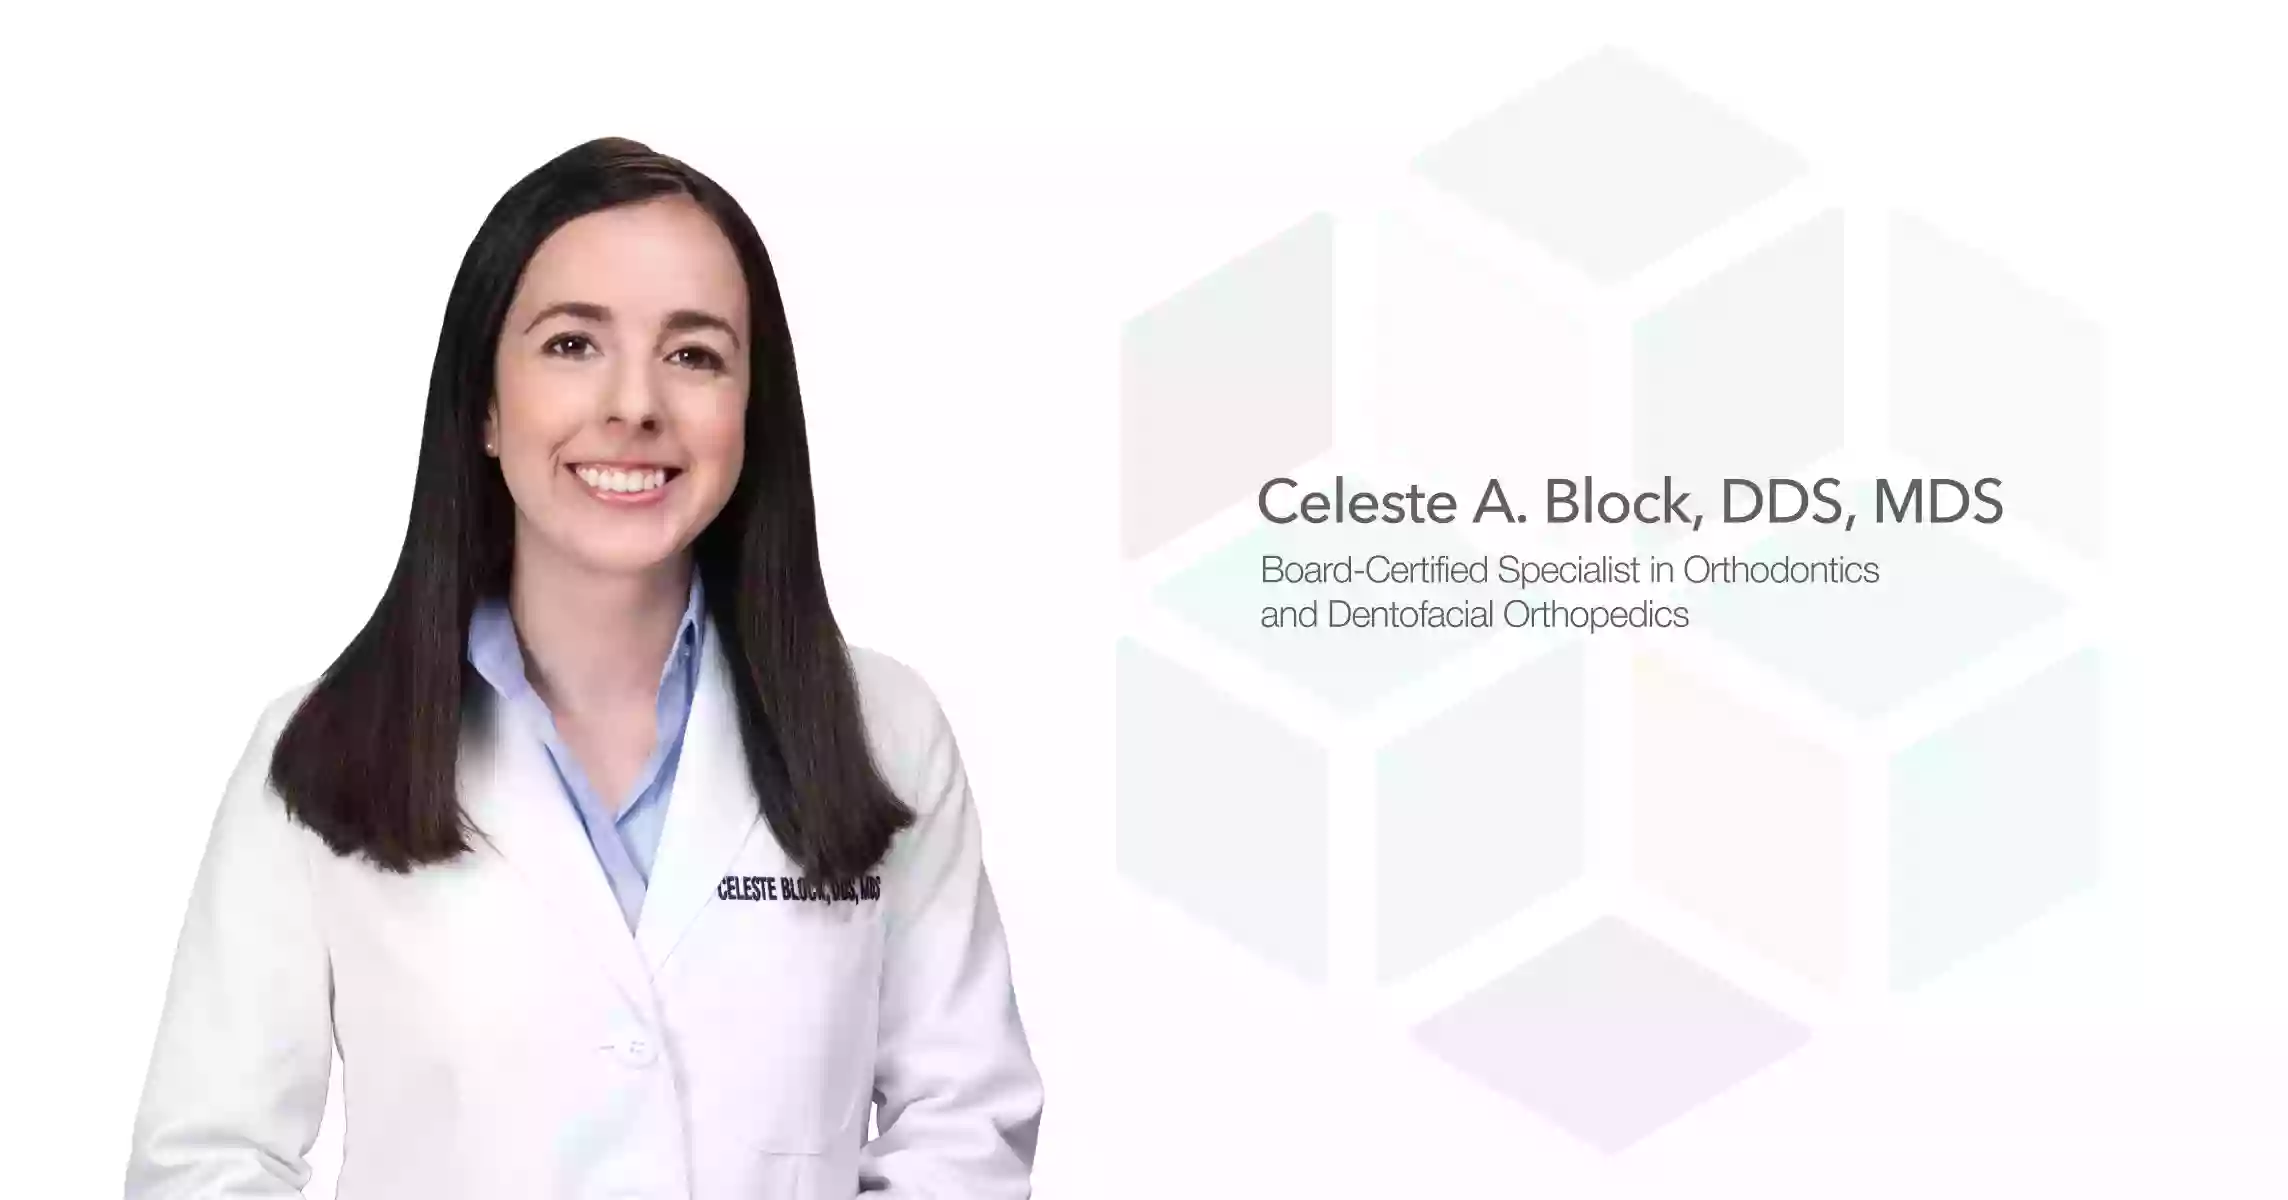 Old Metairie Orthodontics: Dr. Celeste A. Block, DDS, MDS